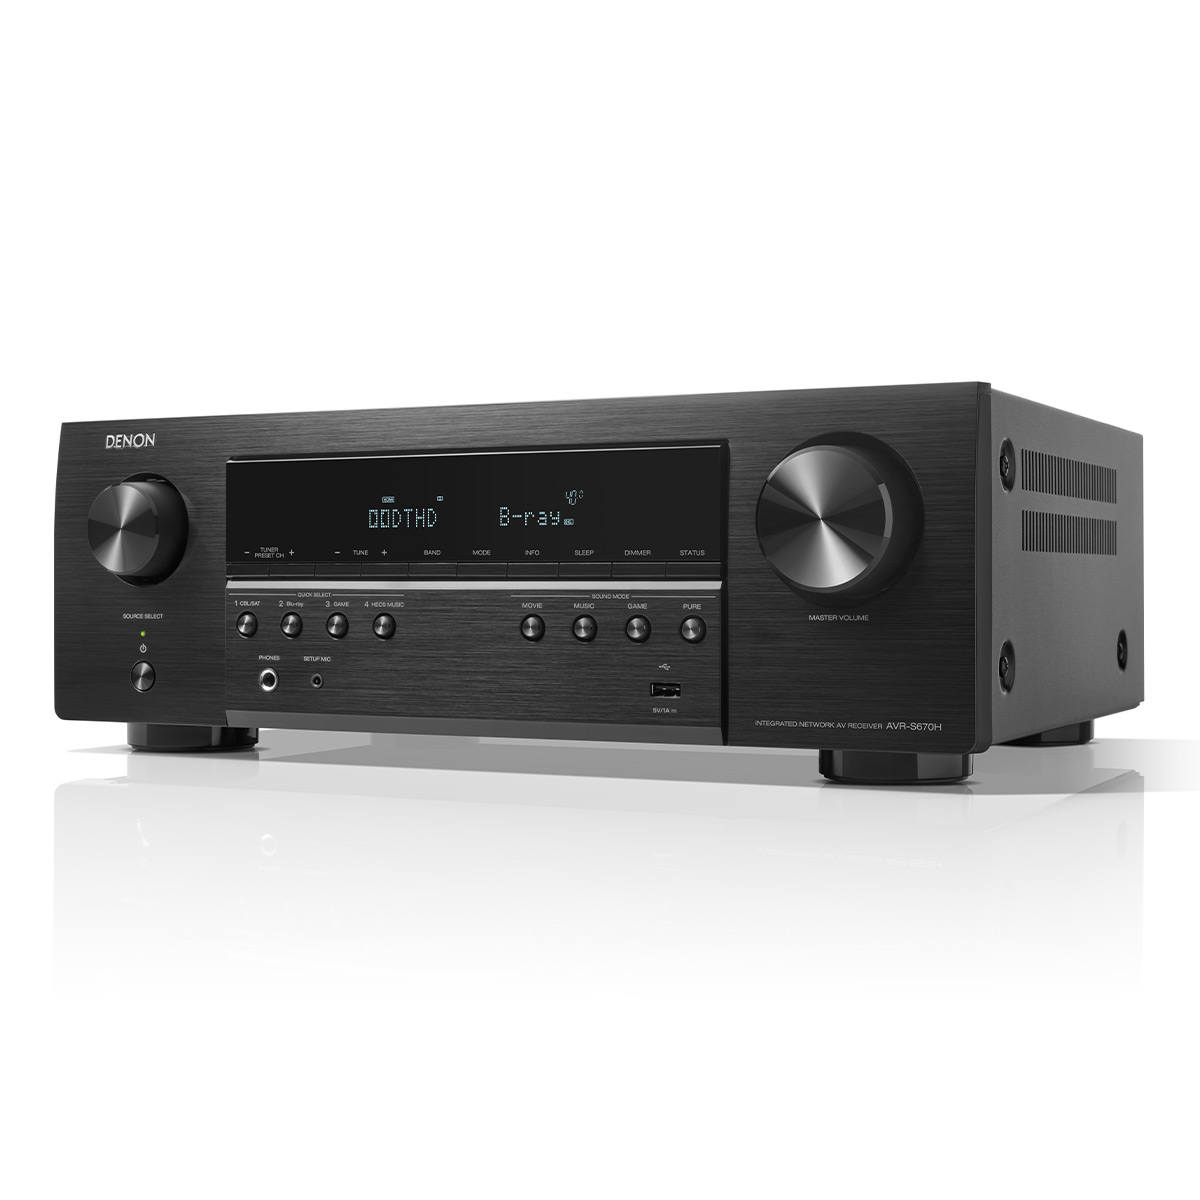 Denon AVR-S670H 5.2 Channel 8K Home Theater Receiver with Dolby TrueHD Audio, HDR10+, and HEOS Built-In - image 5 of 10